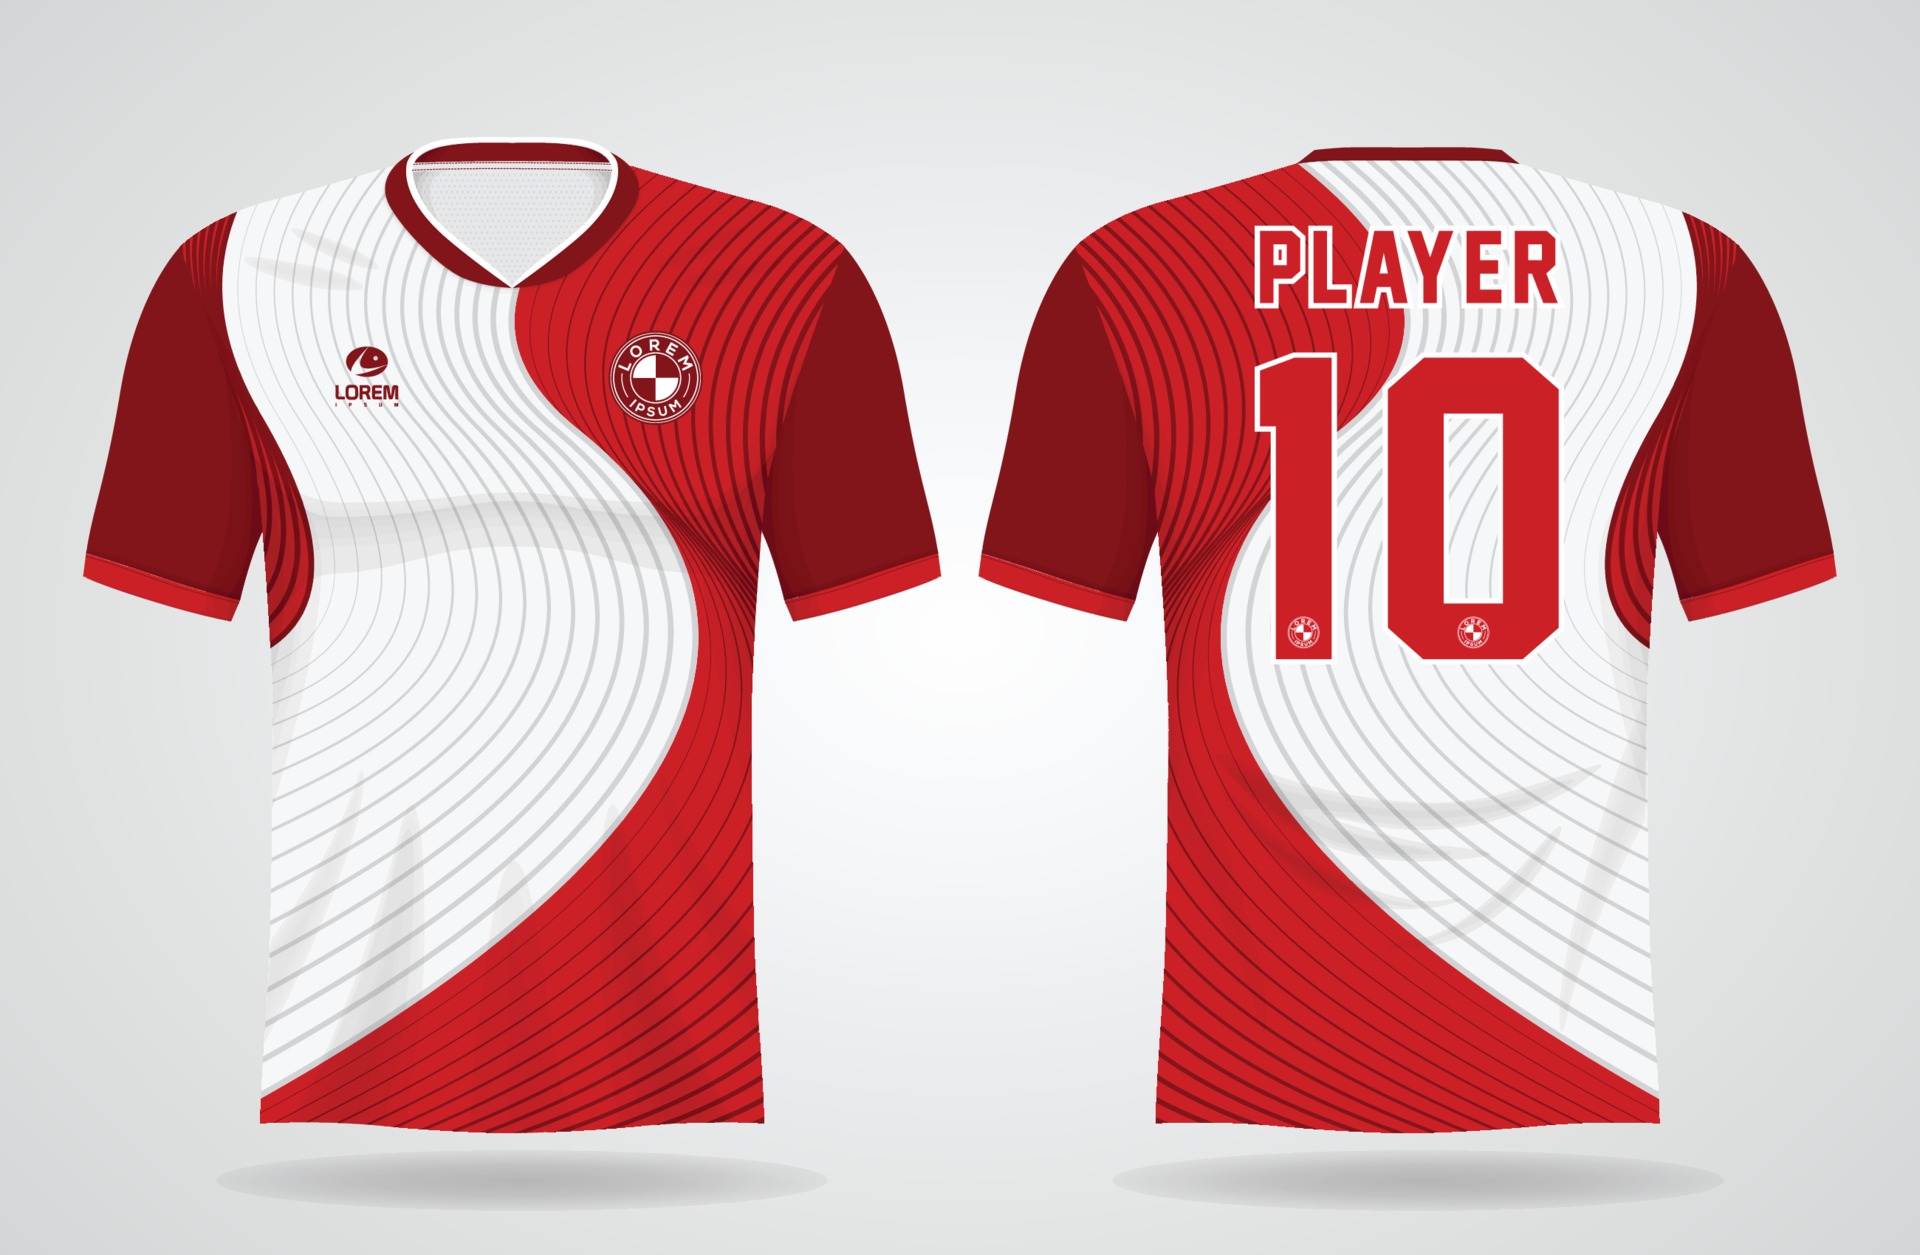 red and white jersey